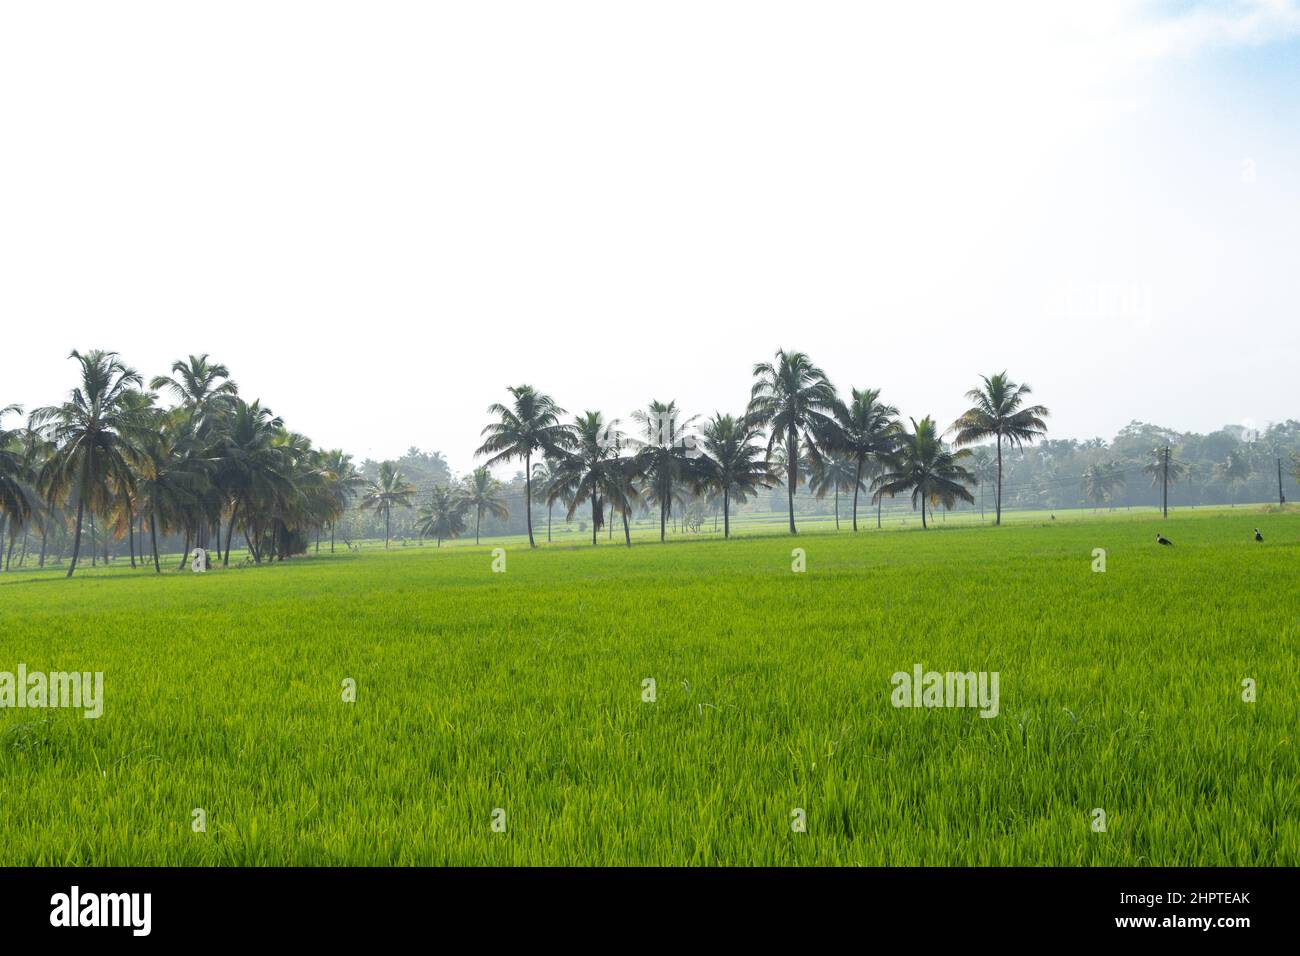 Green Paddy Field And Coconut Trees In The Border From Palakkad District The Rice Bowl Of